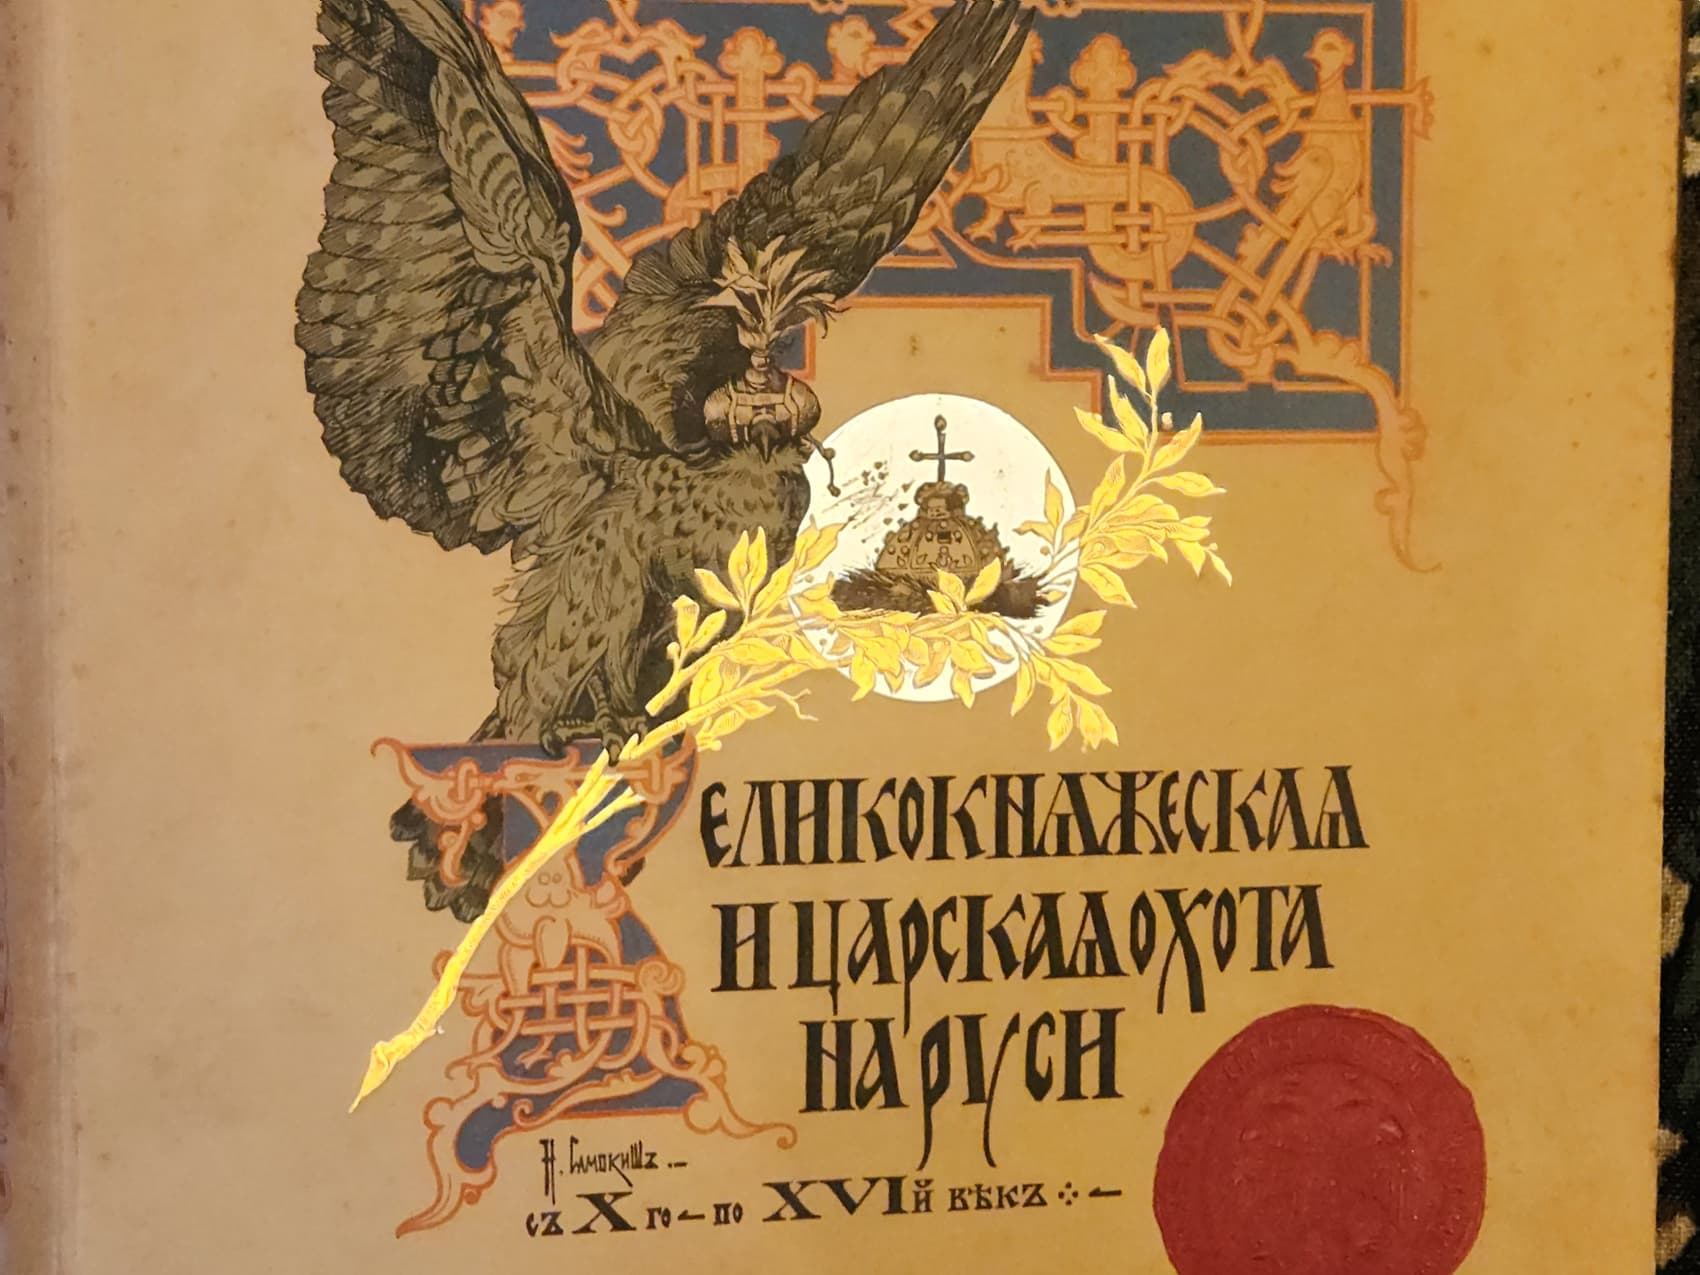 The Archives of Falconry Karl-Heinz Gersmann Library